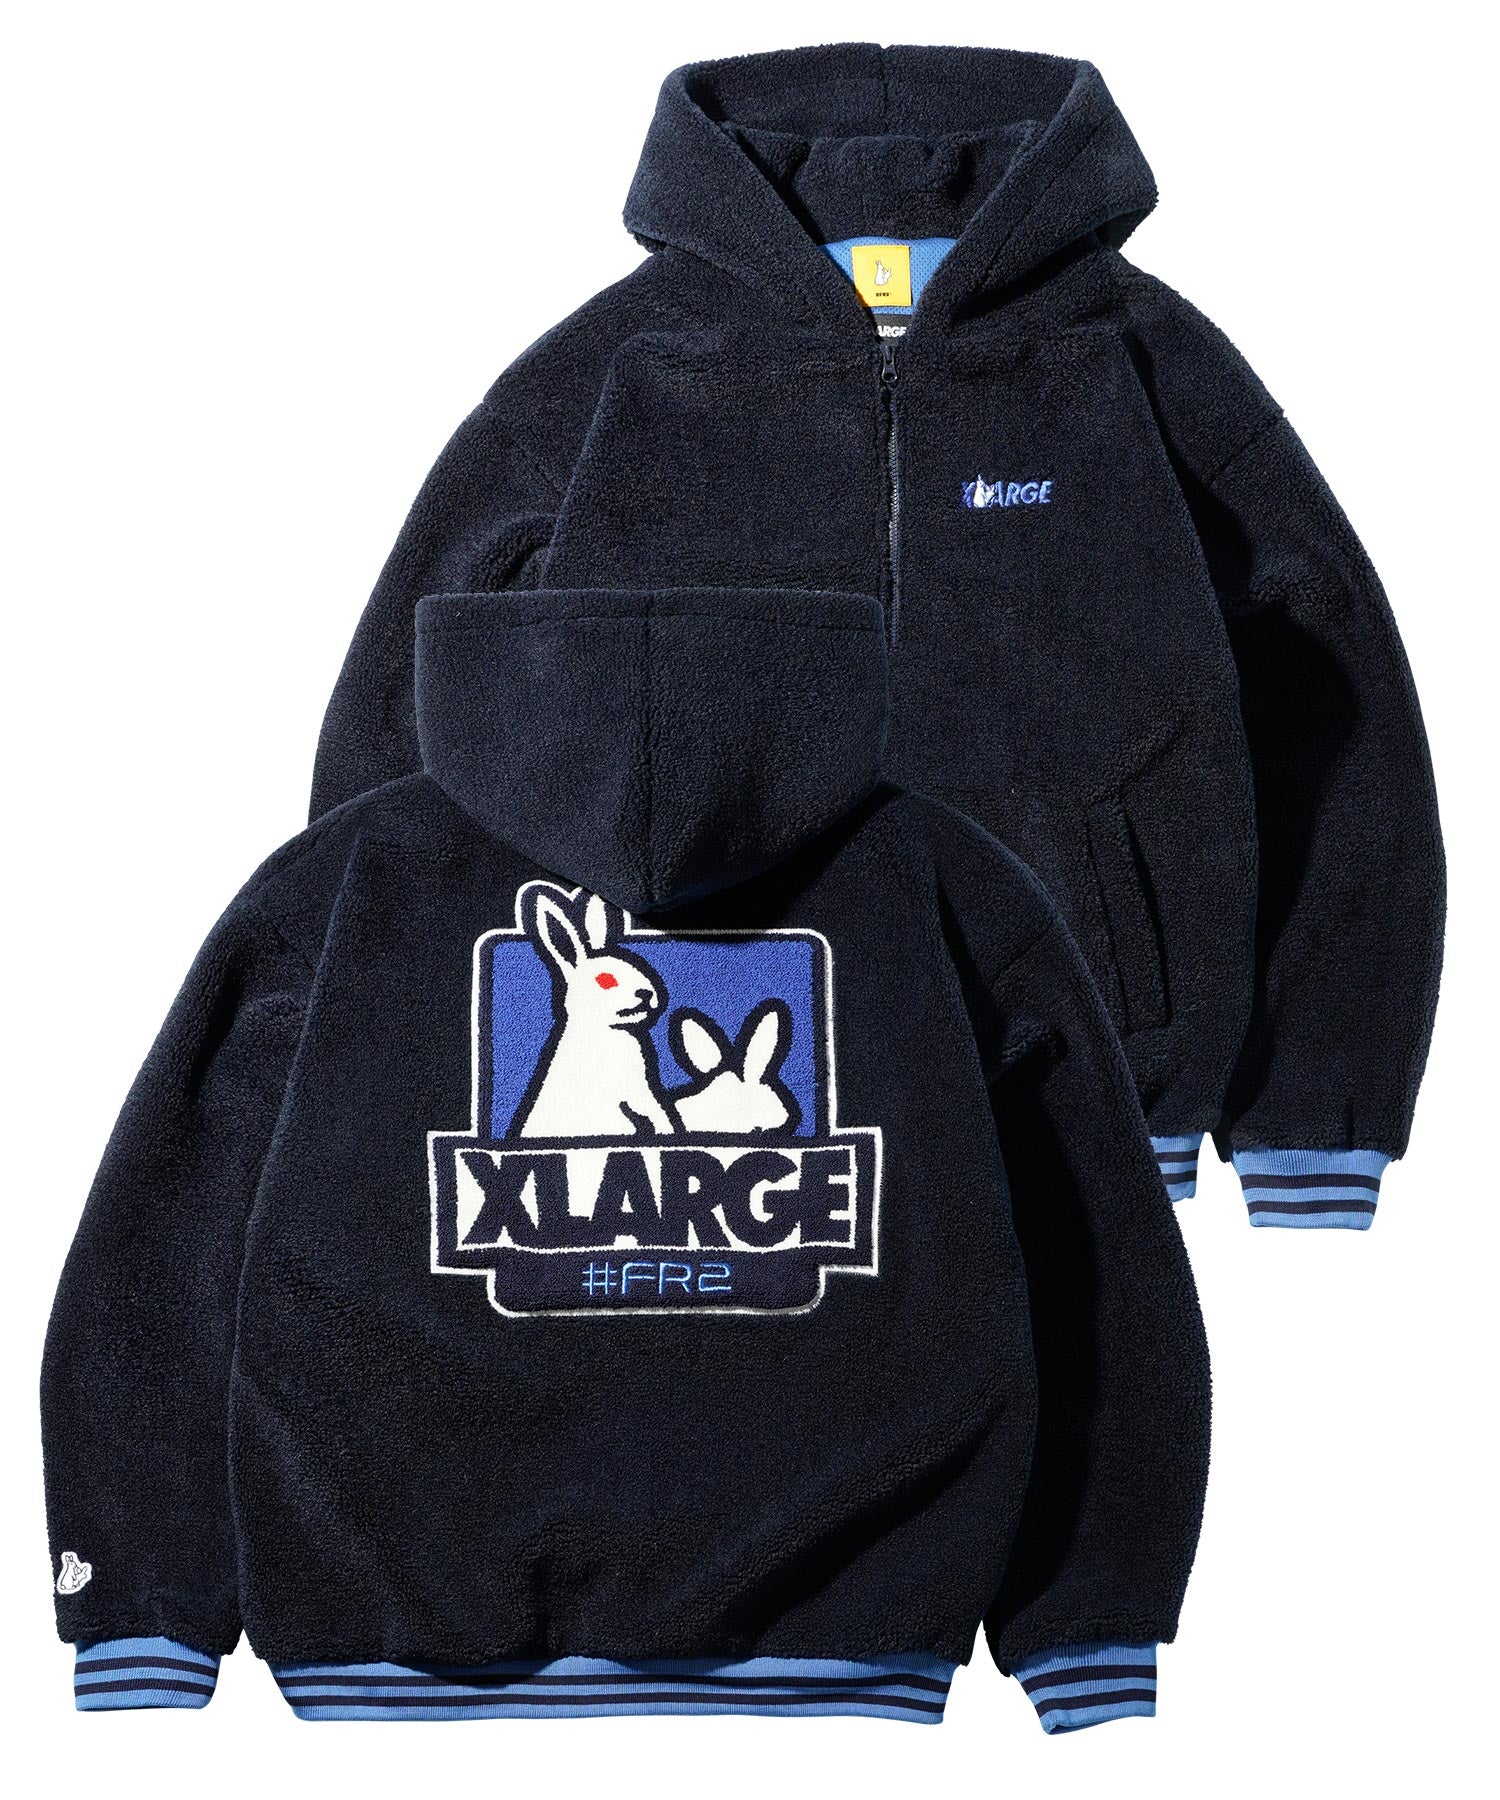 XLARGE collaboration with FR2 Hoodie